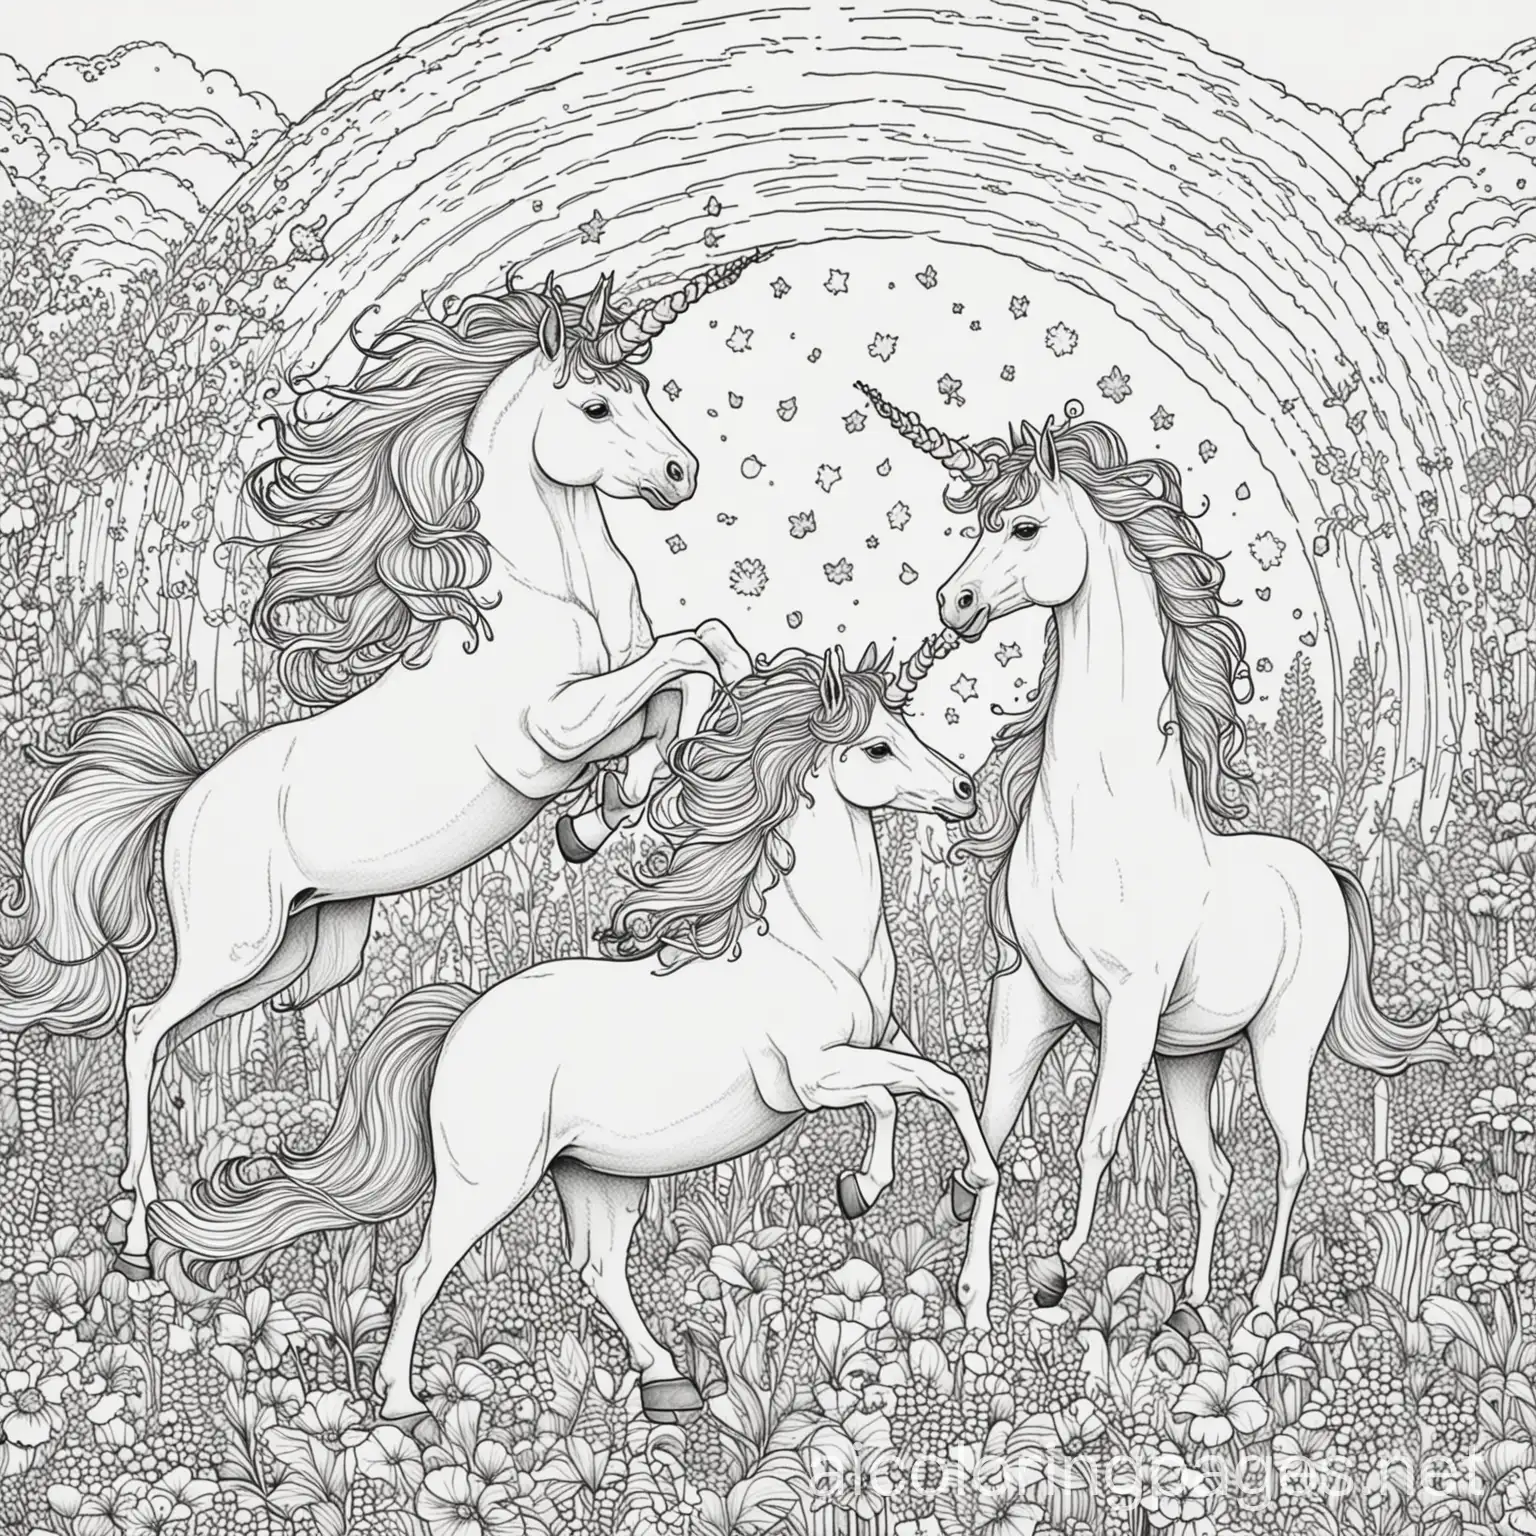 Unicorn-and-Rainbow-Coloring-Page-with-Simplicity-and-Ample-White-Space